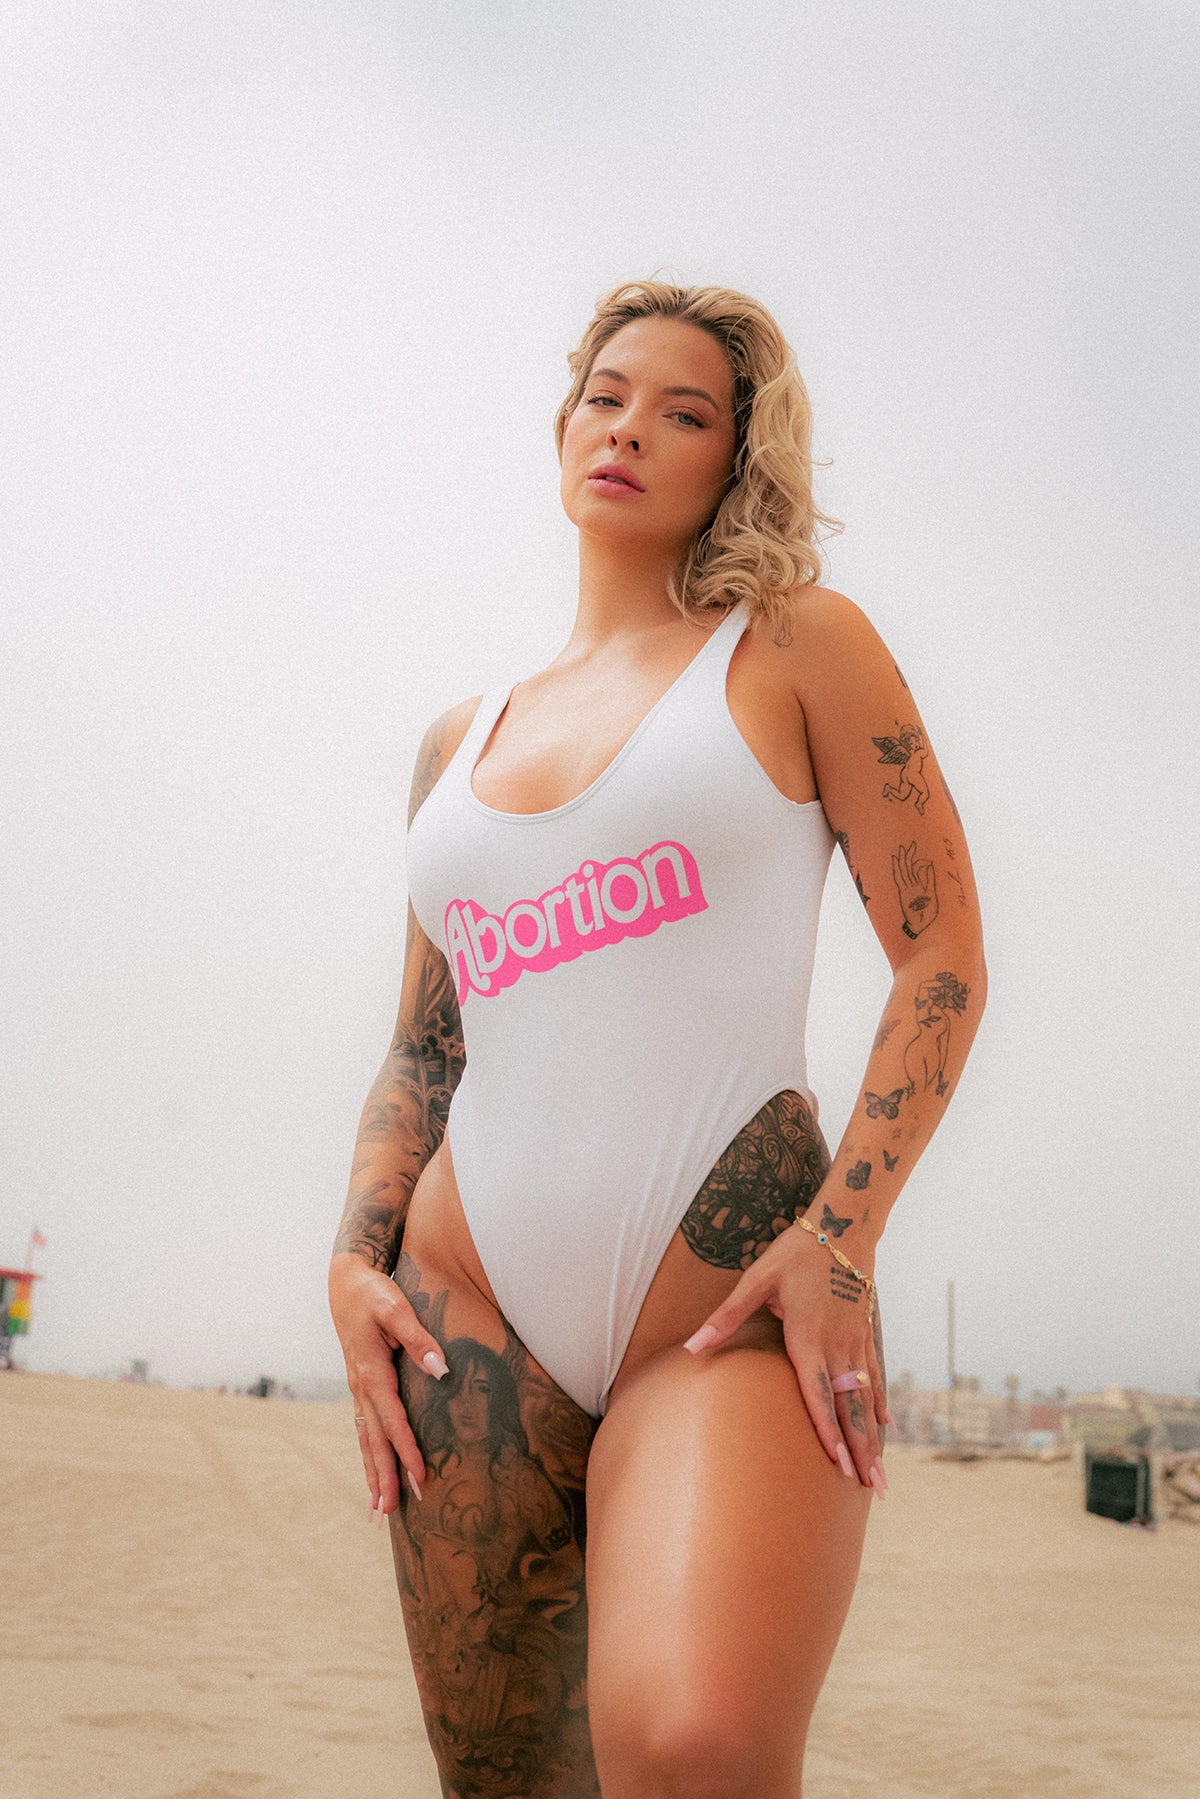 Abortion is Healthcare - White One-Piece Swimsuit